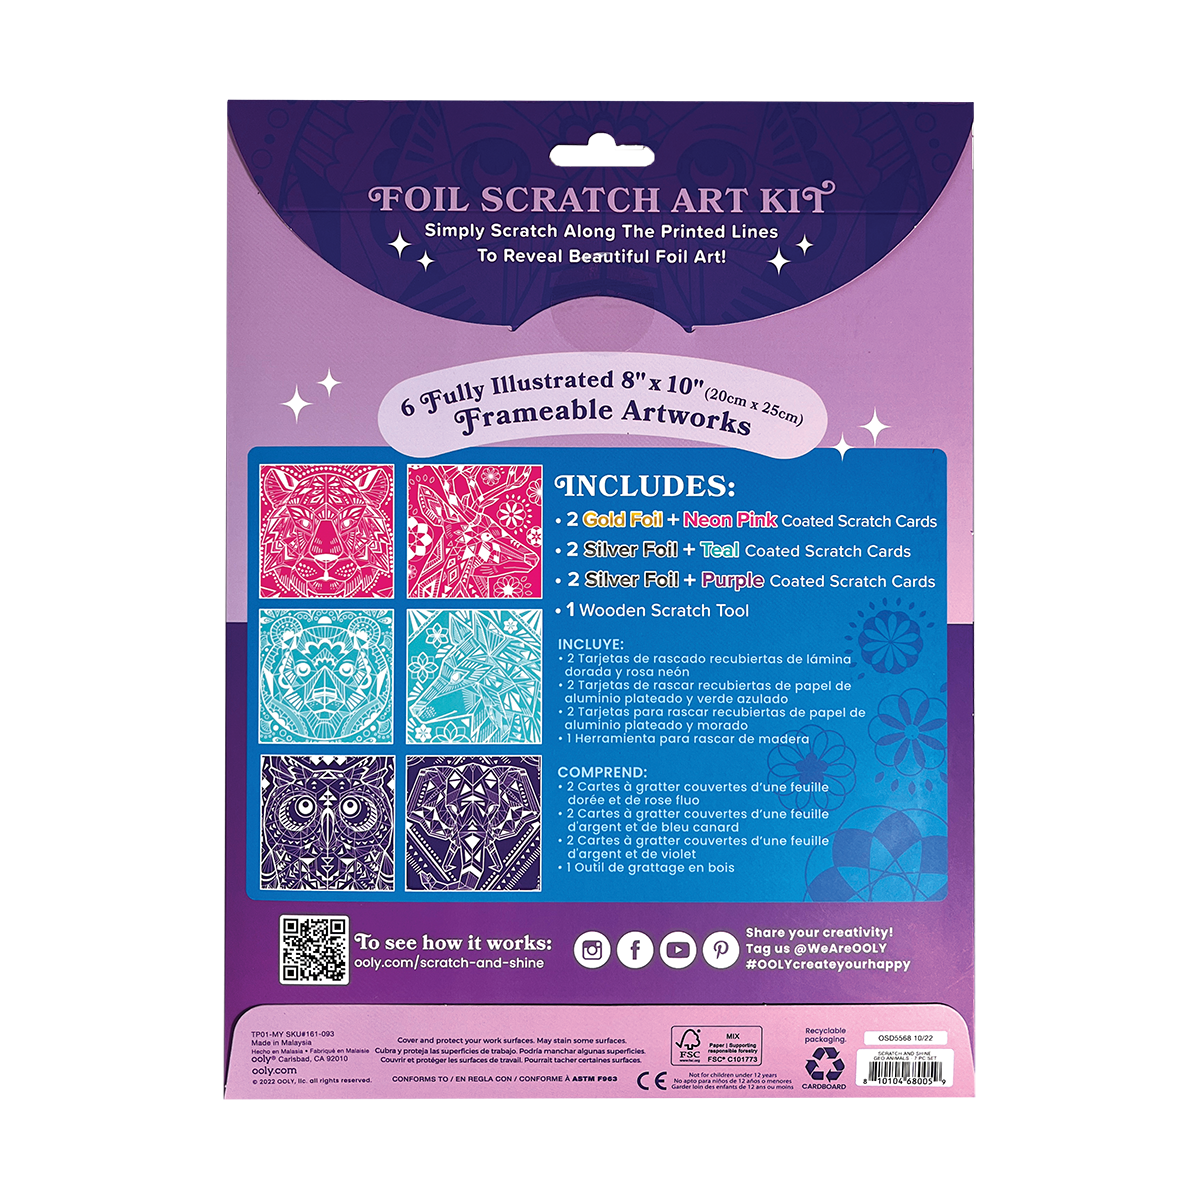 OOLY Scratch and Shine Foil Scratch Art Kit - Geometric Animals back side view of packaging